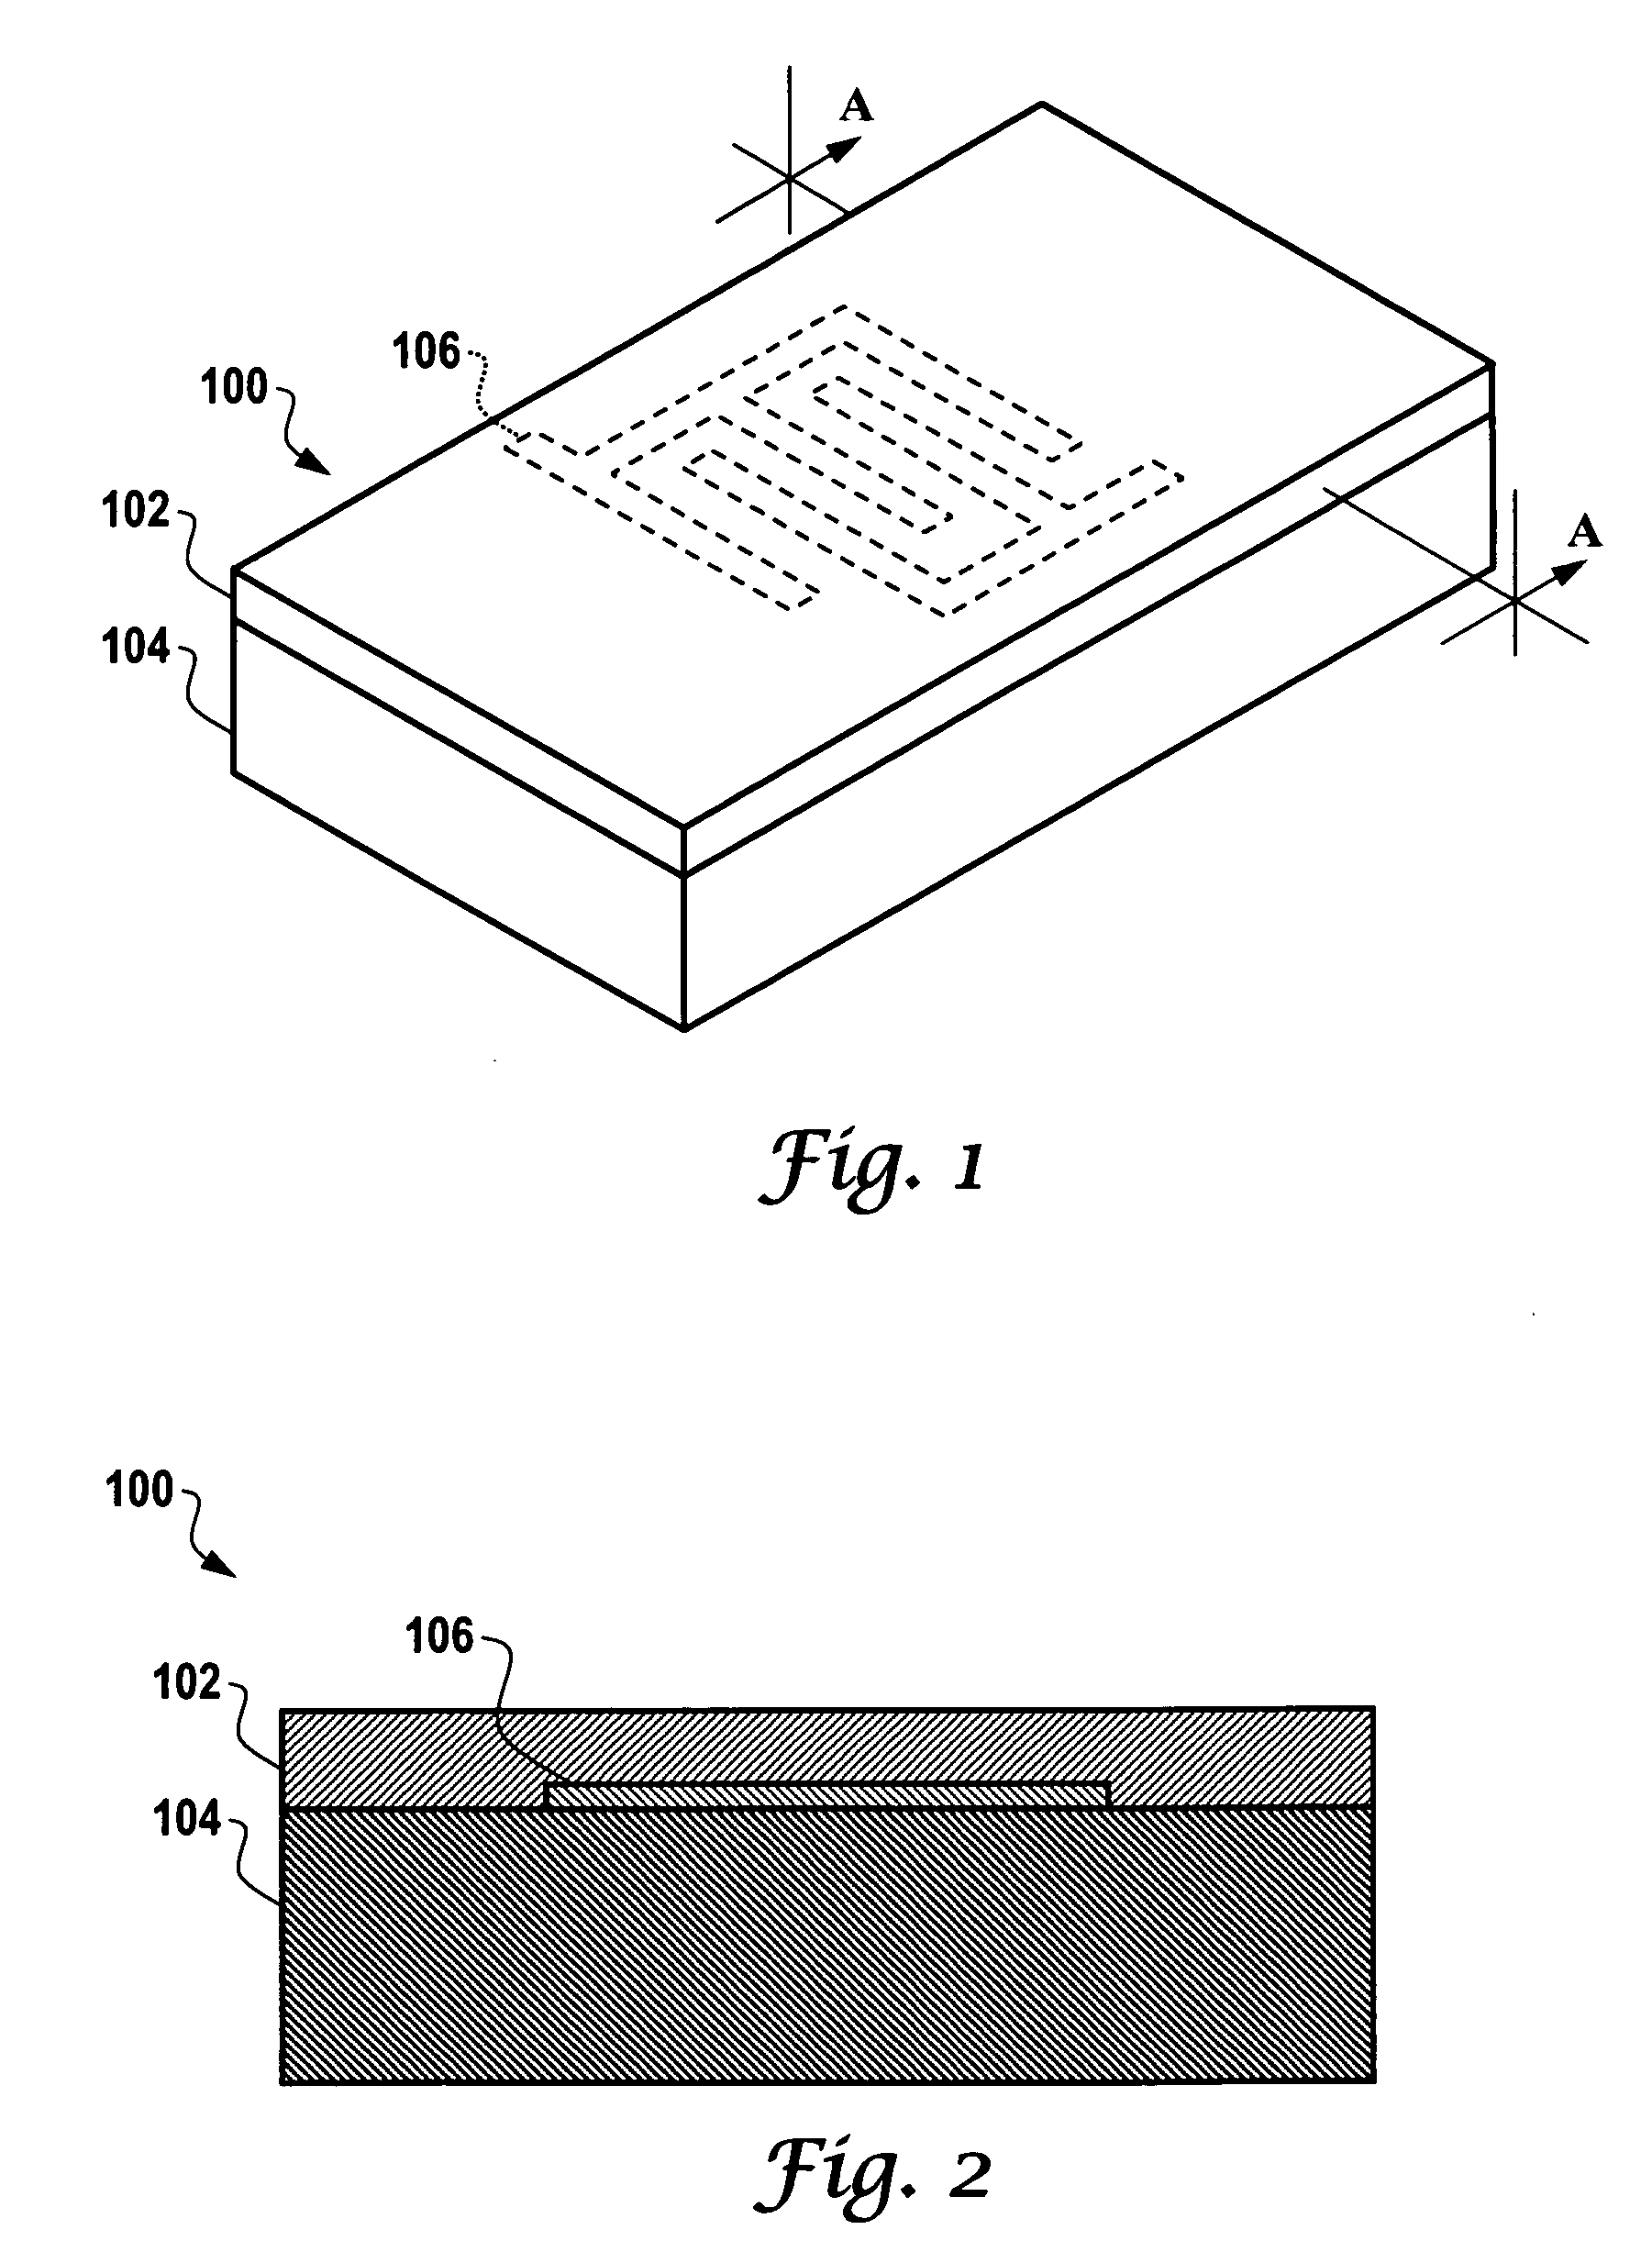 Acoustic wave sensor with reduced condensation and recovery time